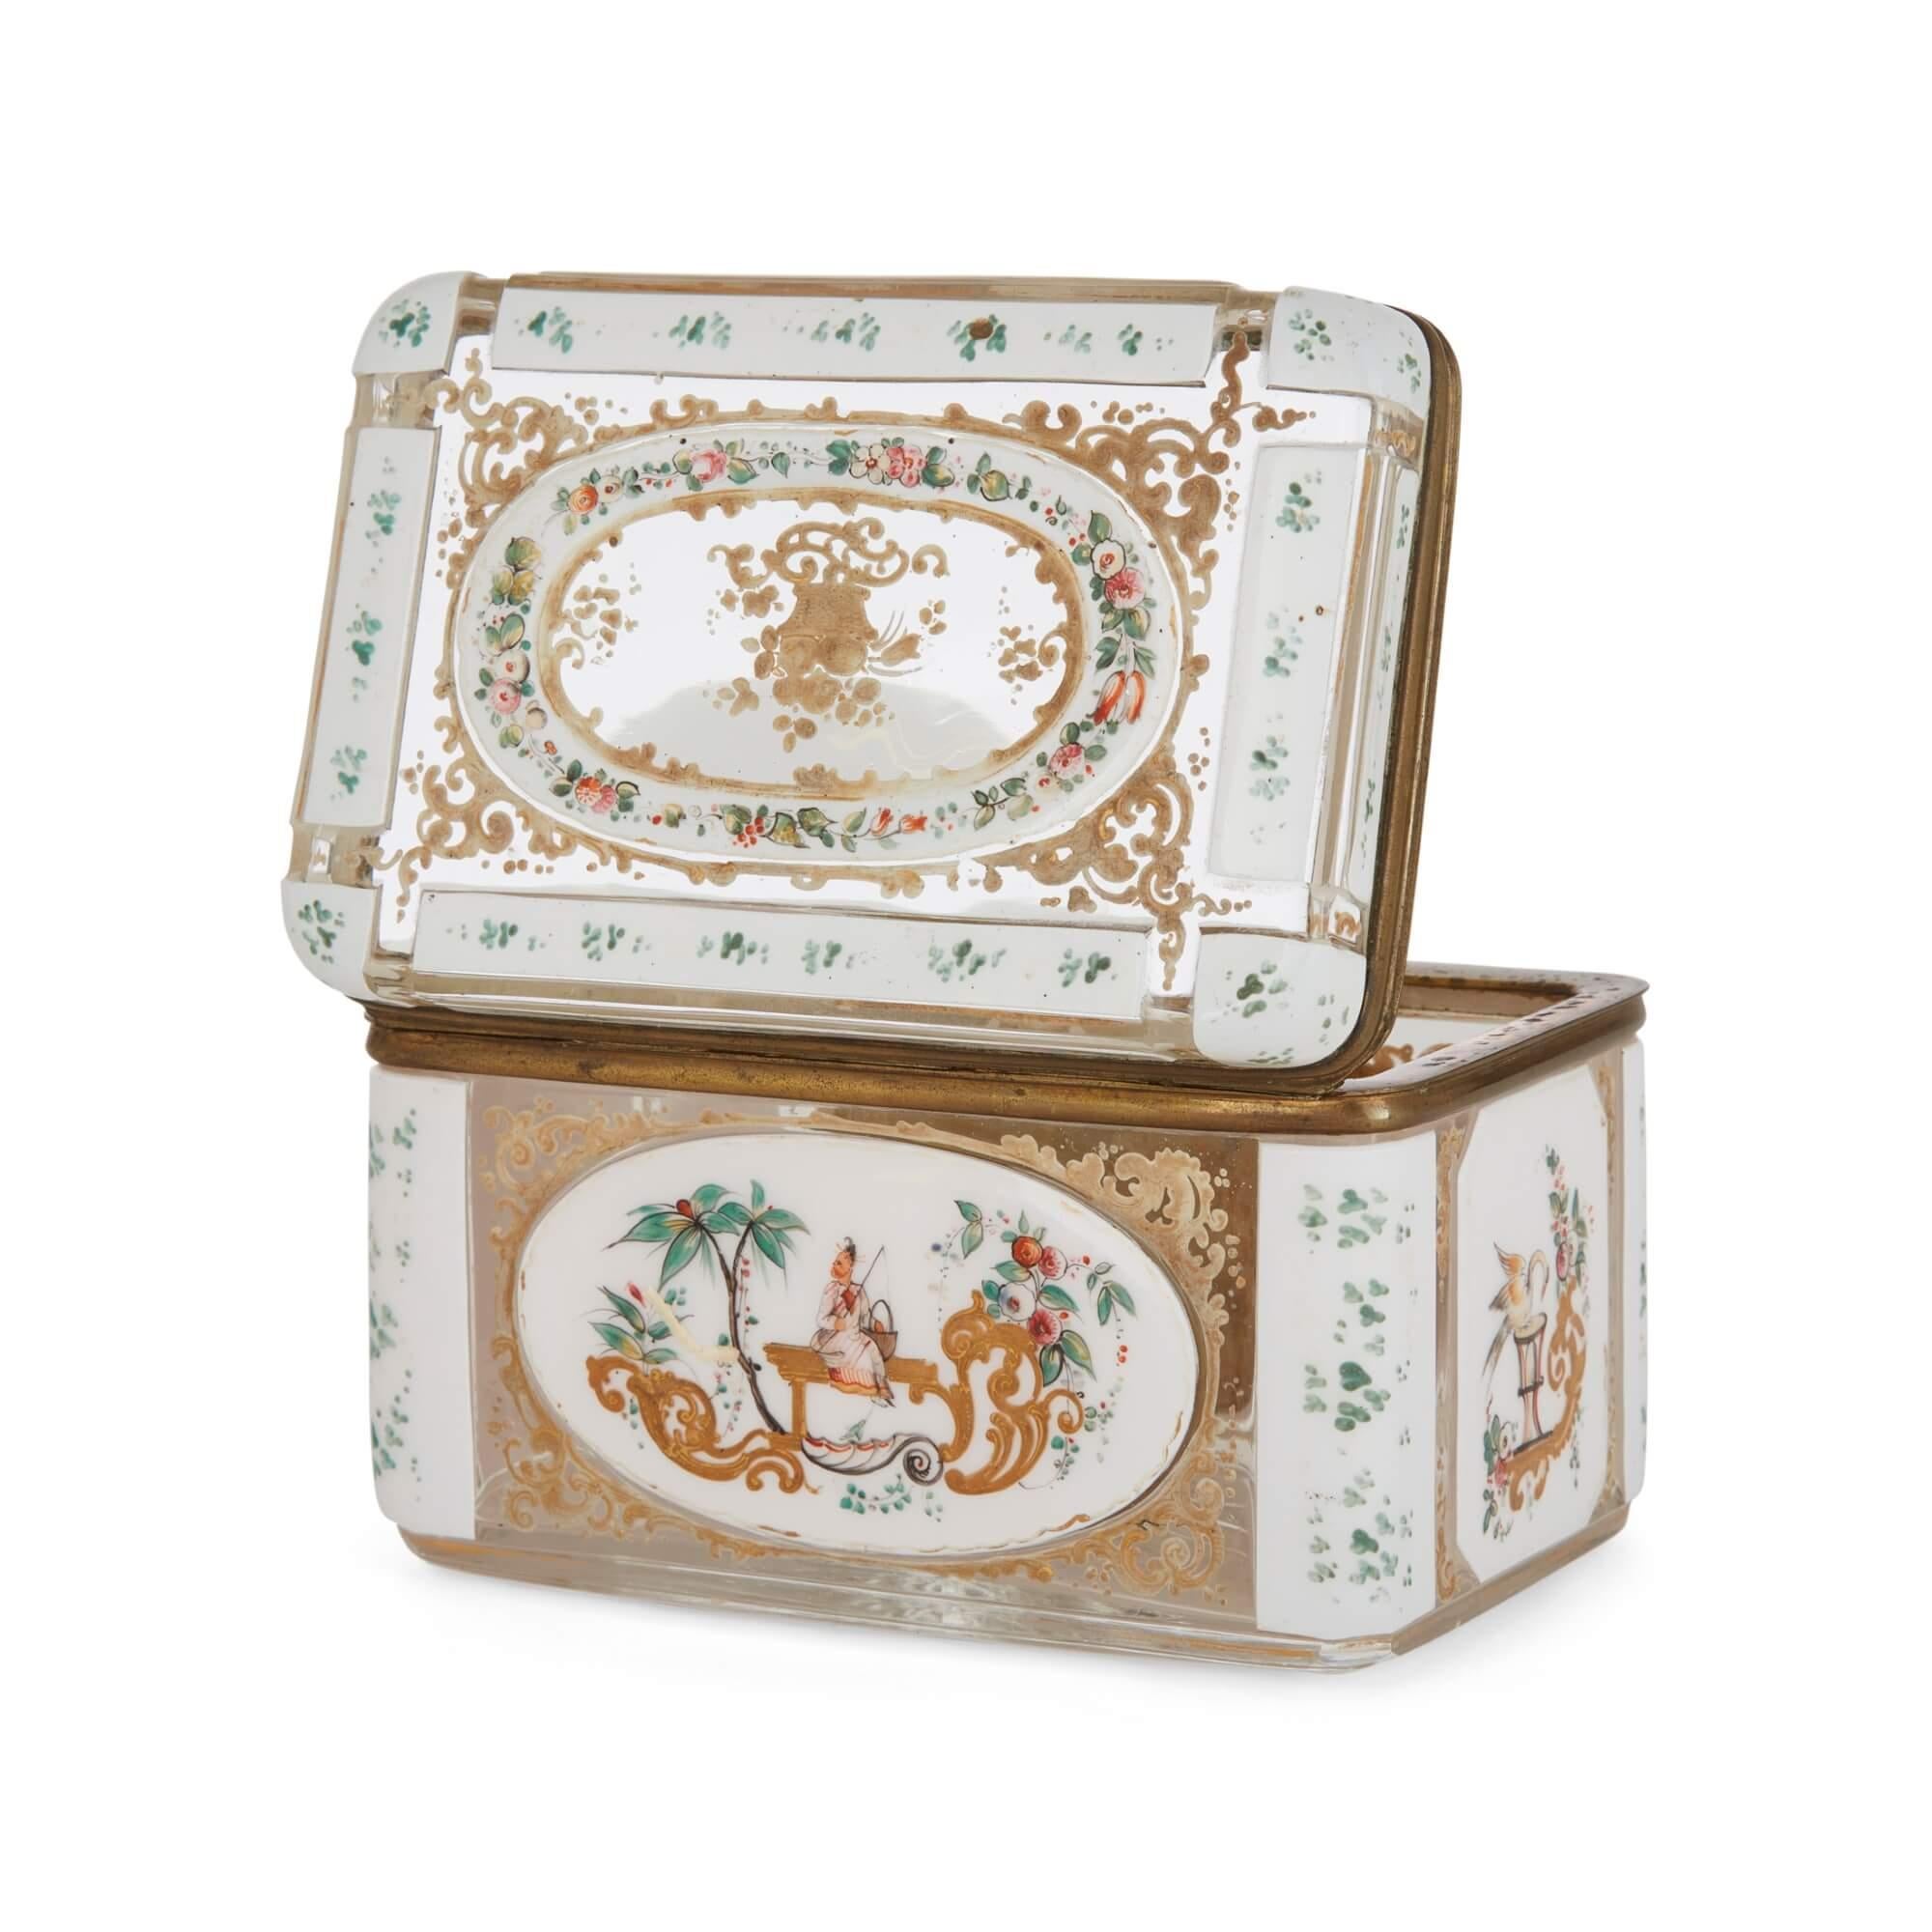 Antique Bohemian glass box decorated in Chinoiserie style
Bohemian, 19th Century
Height 10cm, width 15cm, depth 10cm

This superb casket features intricate painted details atop its glass body. The box showcases the expert glassware emerging from